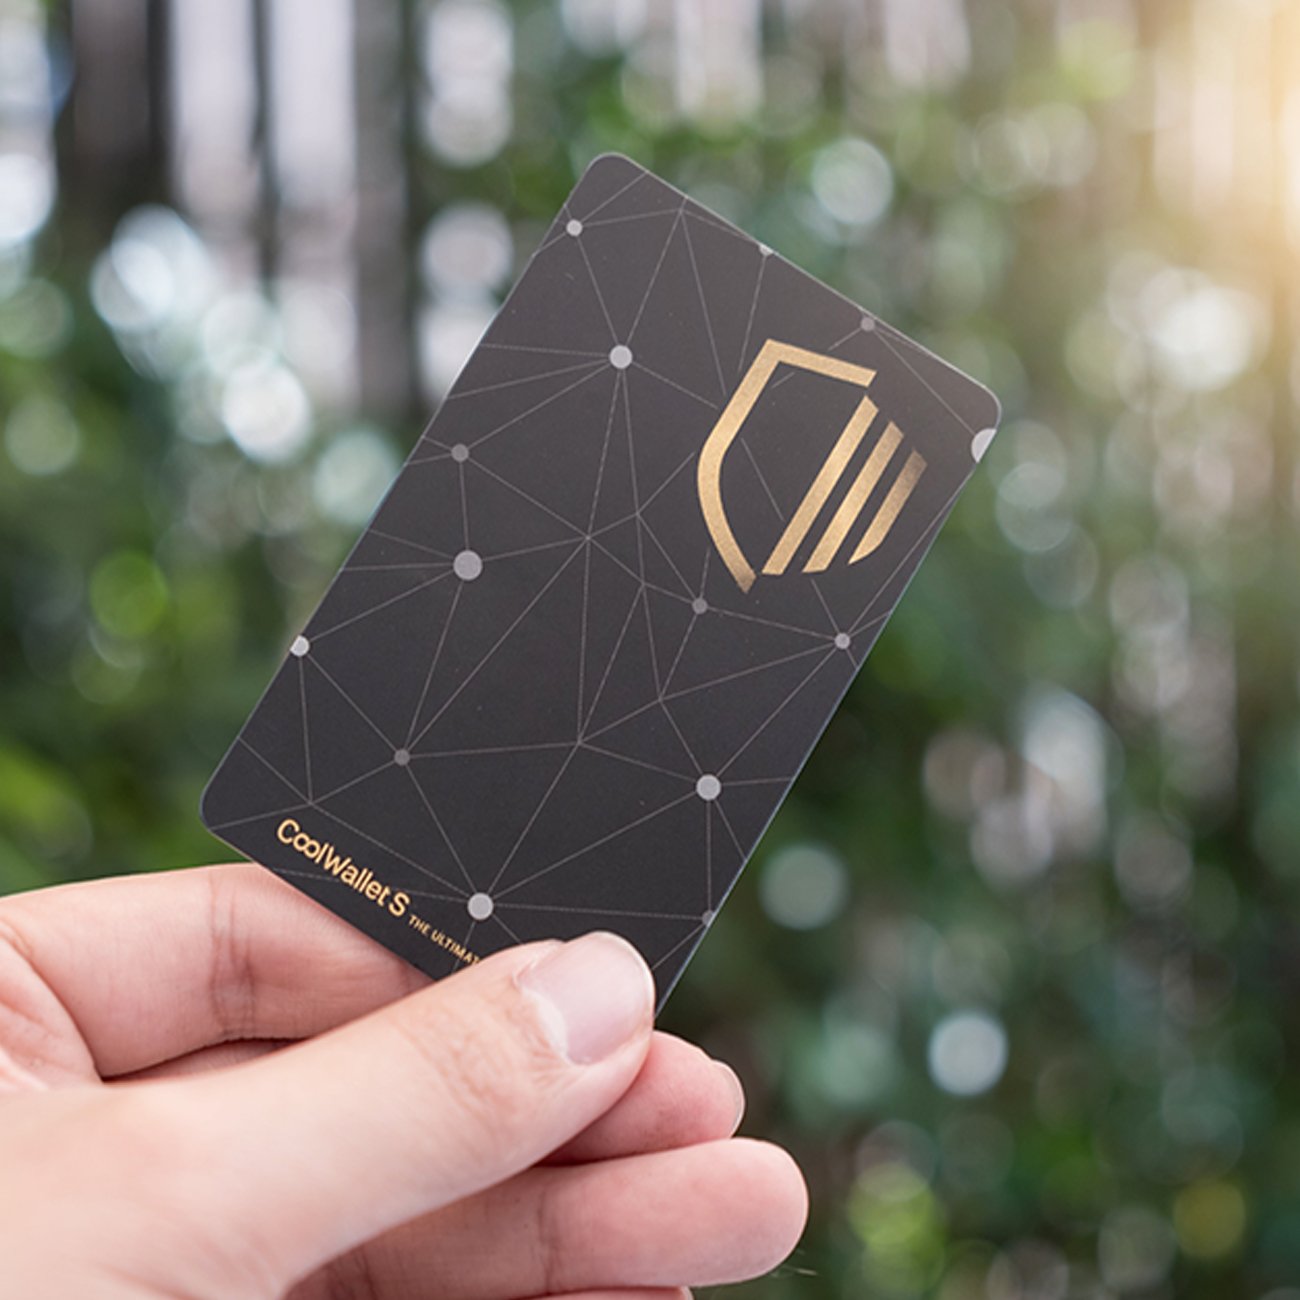 A Look at the Credit Card Shaped Hardware Device Called 'Coolwallet'